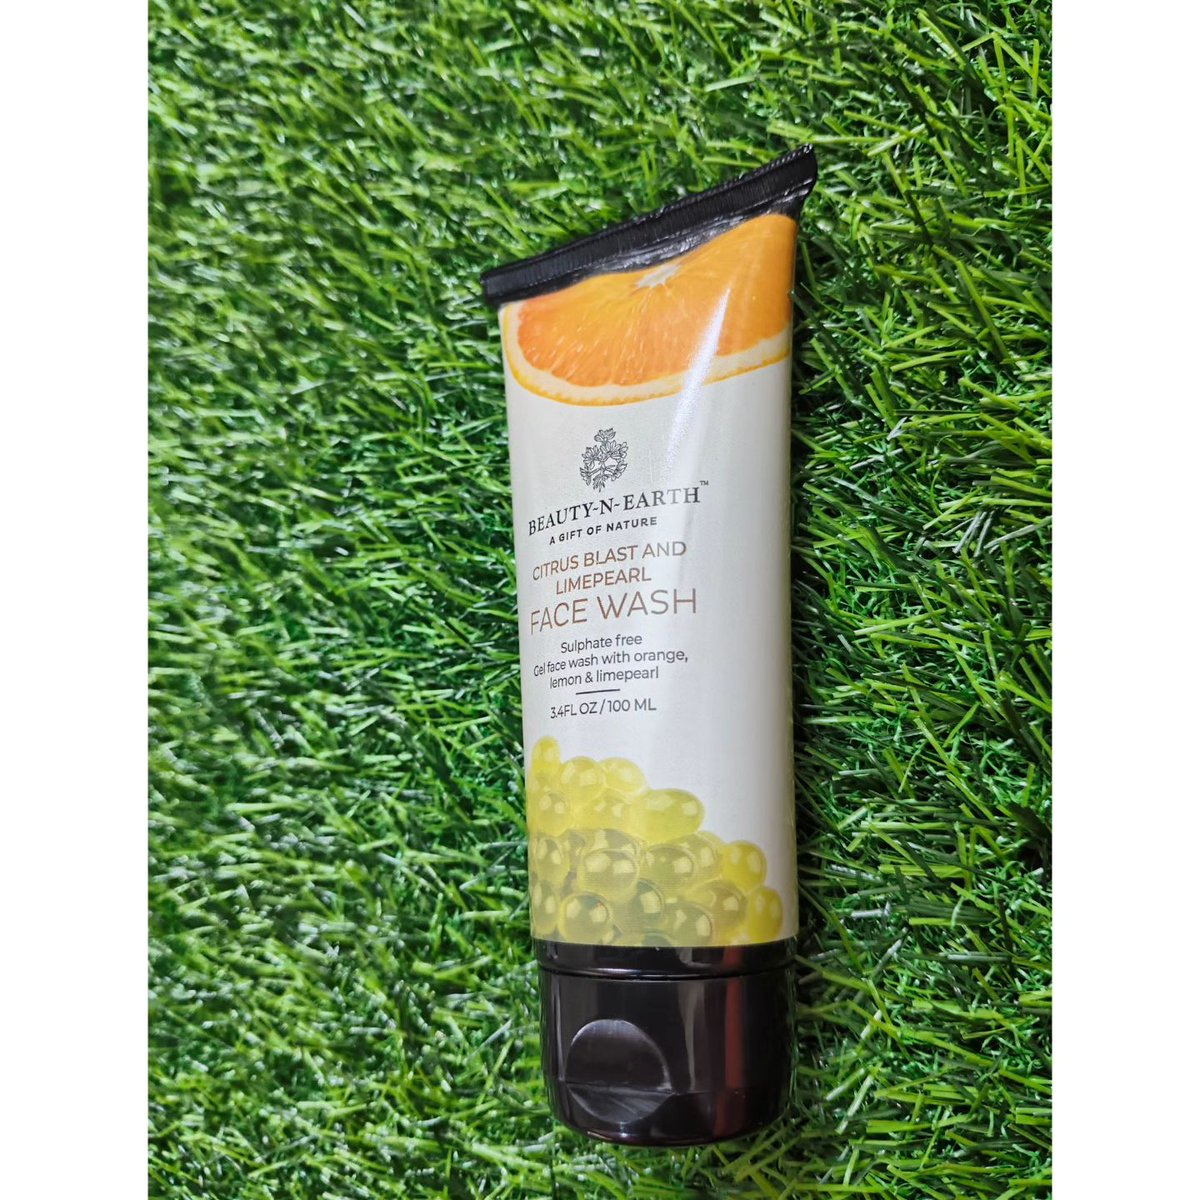 Energize your skin with our Citrus Blast & Limepearl Face Wash! 🍊🍋It's the ultimate refreshment for a vibrant complexion.
🌟Get it -beautynearth.com/.../citrus-bla…
#CitrusSkincare #LimepearlGlow #SkinRevival #FreshComplexion #SkincareEssentials #NaturalIngredients #CrueltyFree #beauty